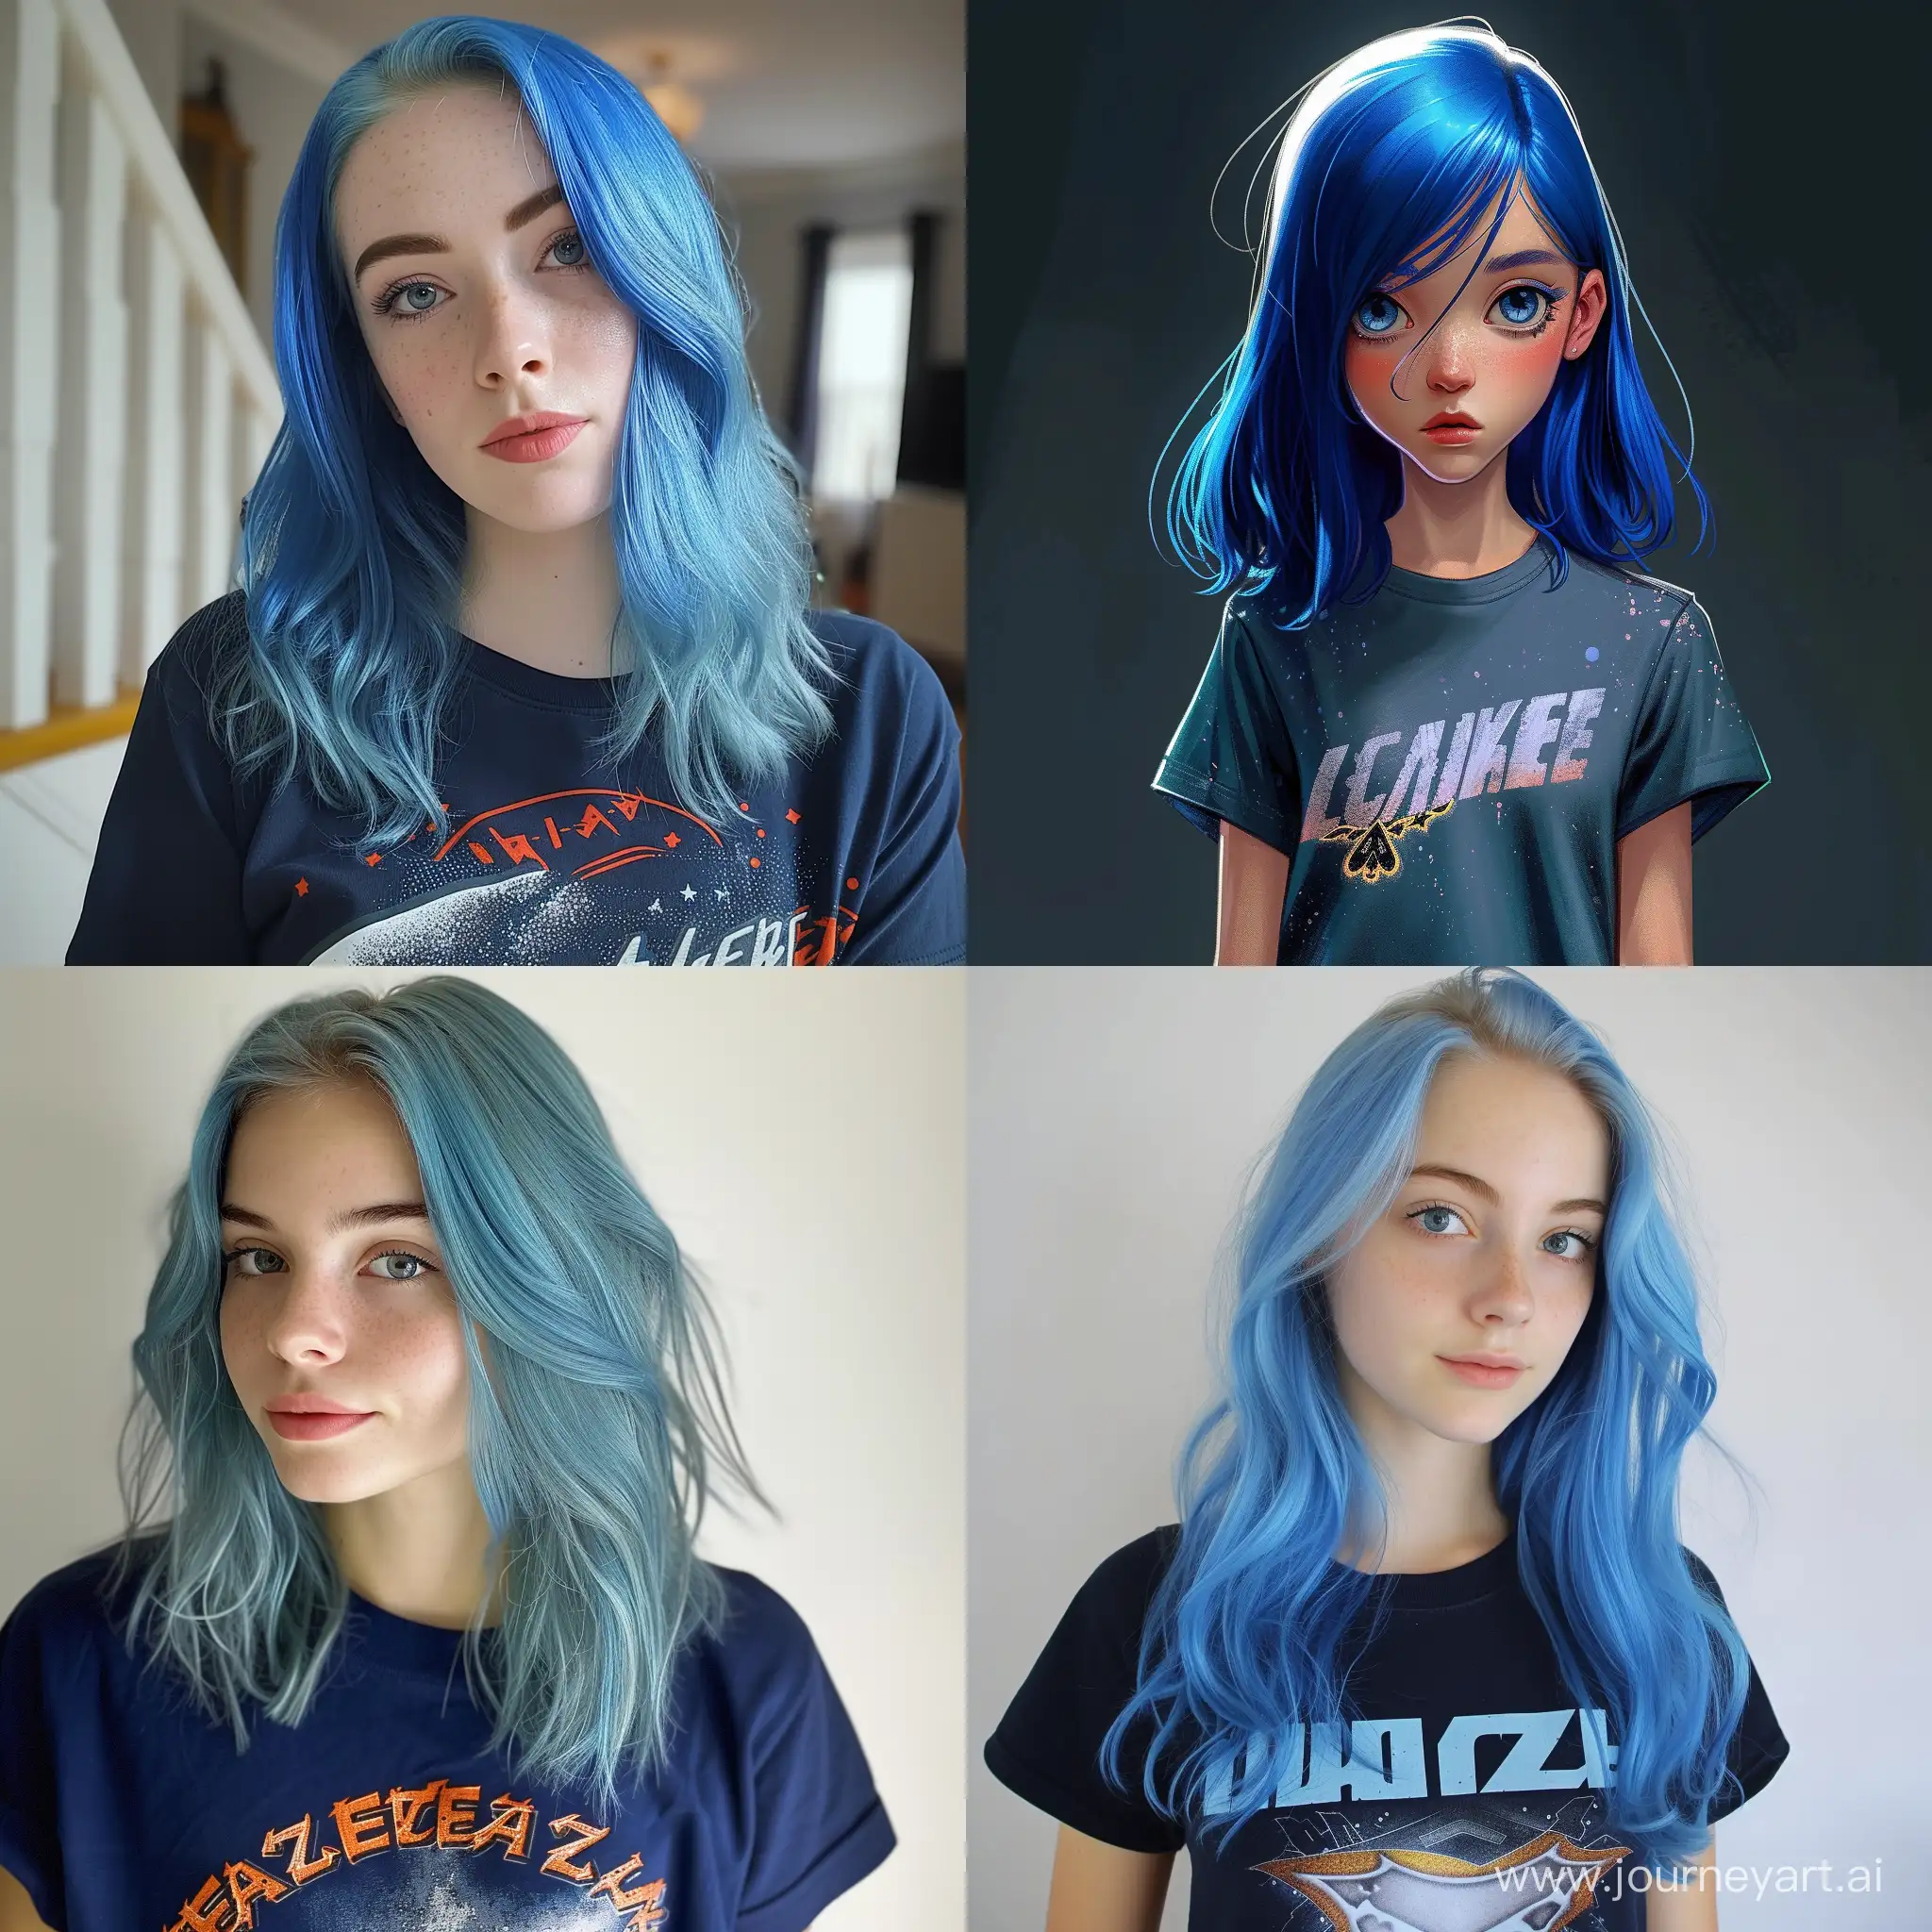 Young-Woman-with-Blue-Hair-in-Metallica-TShirt